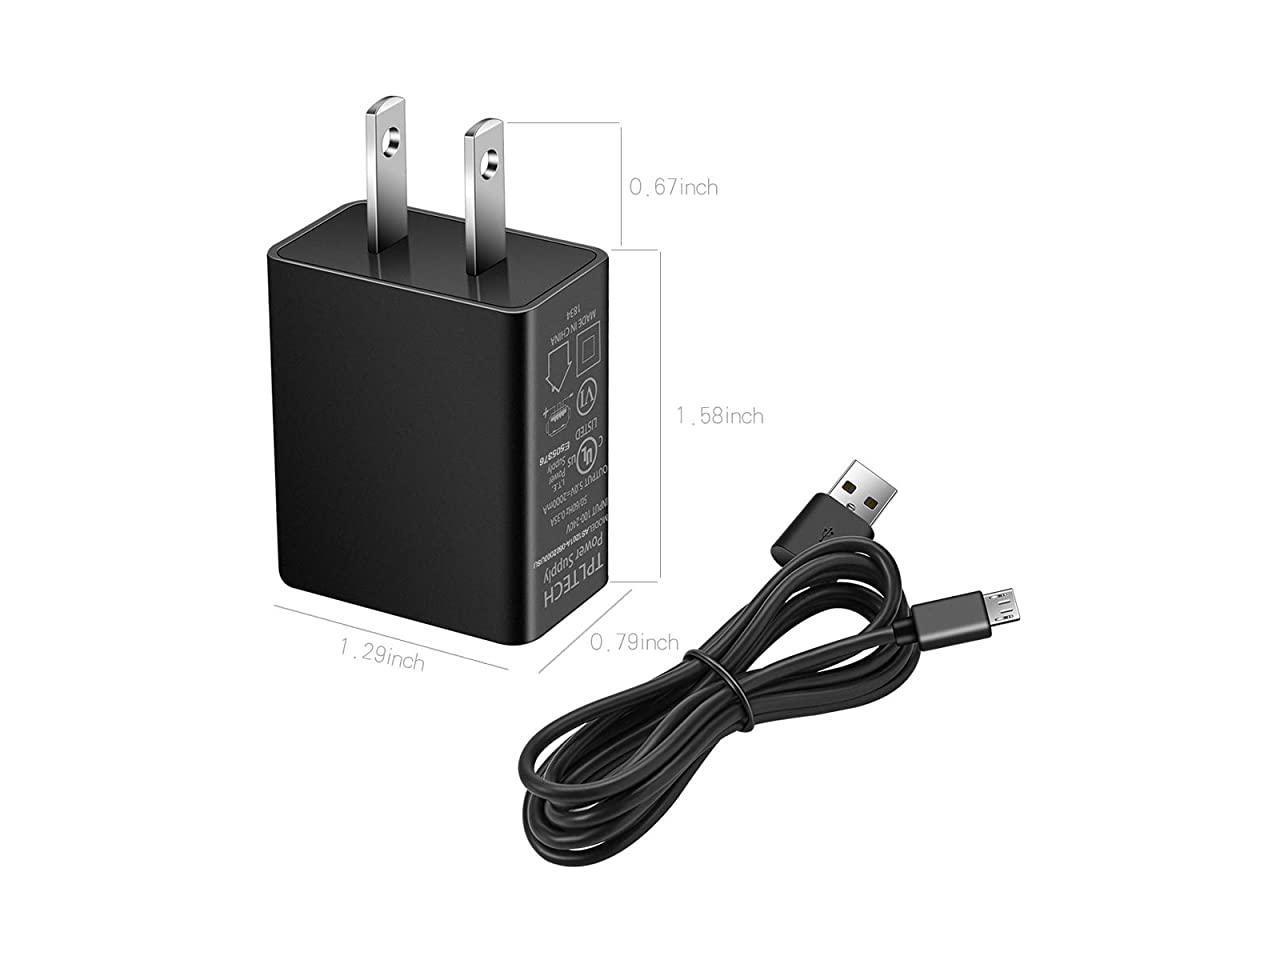 kindle fire hd chargers